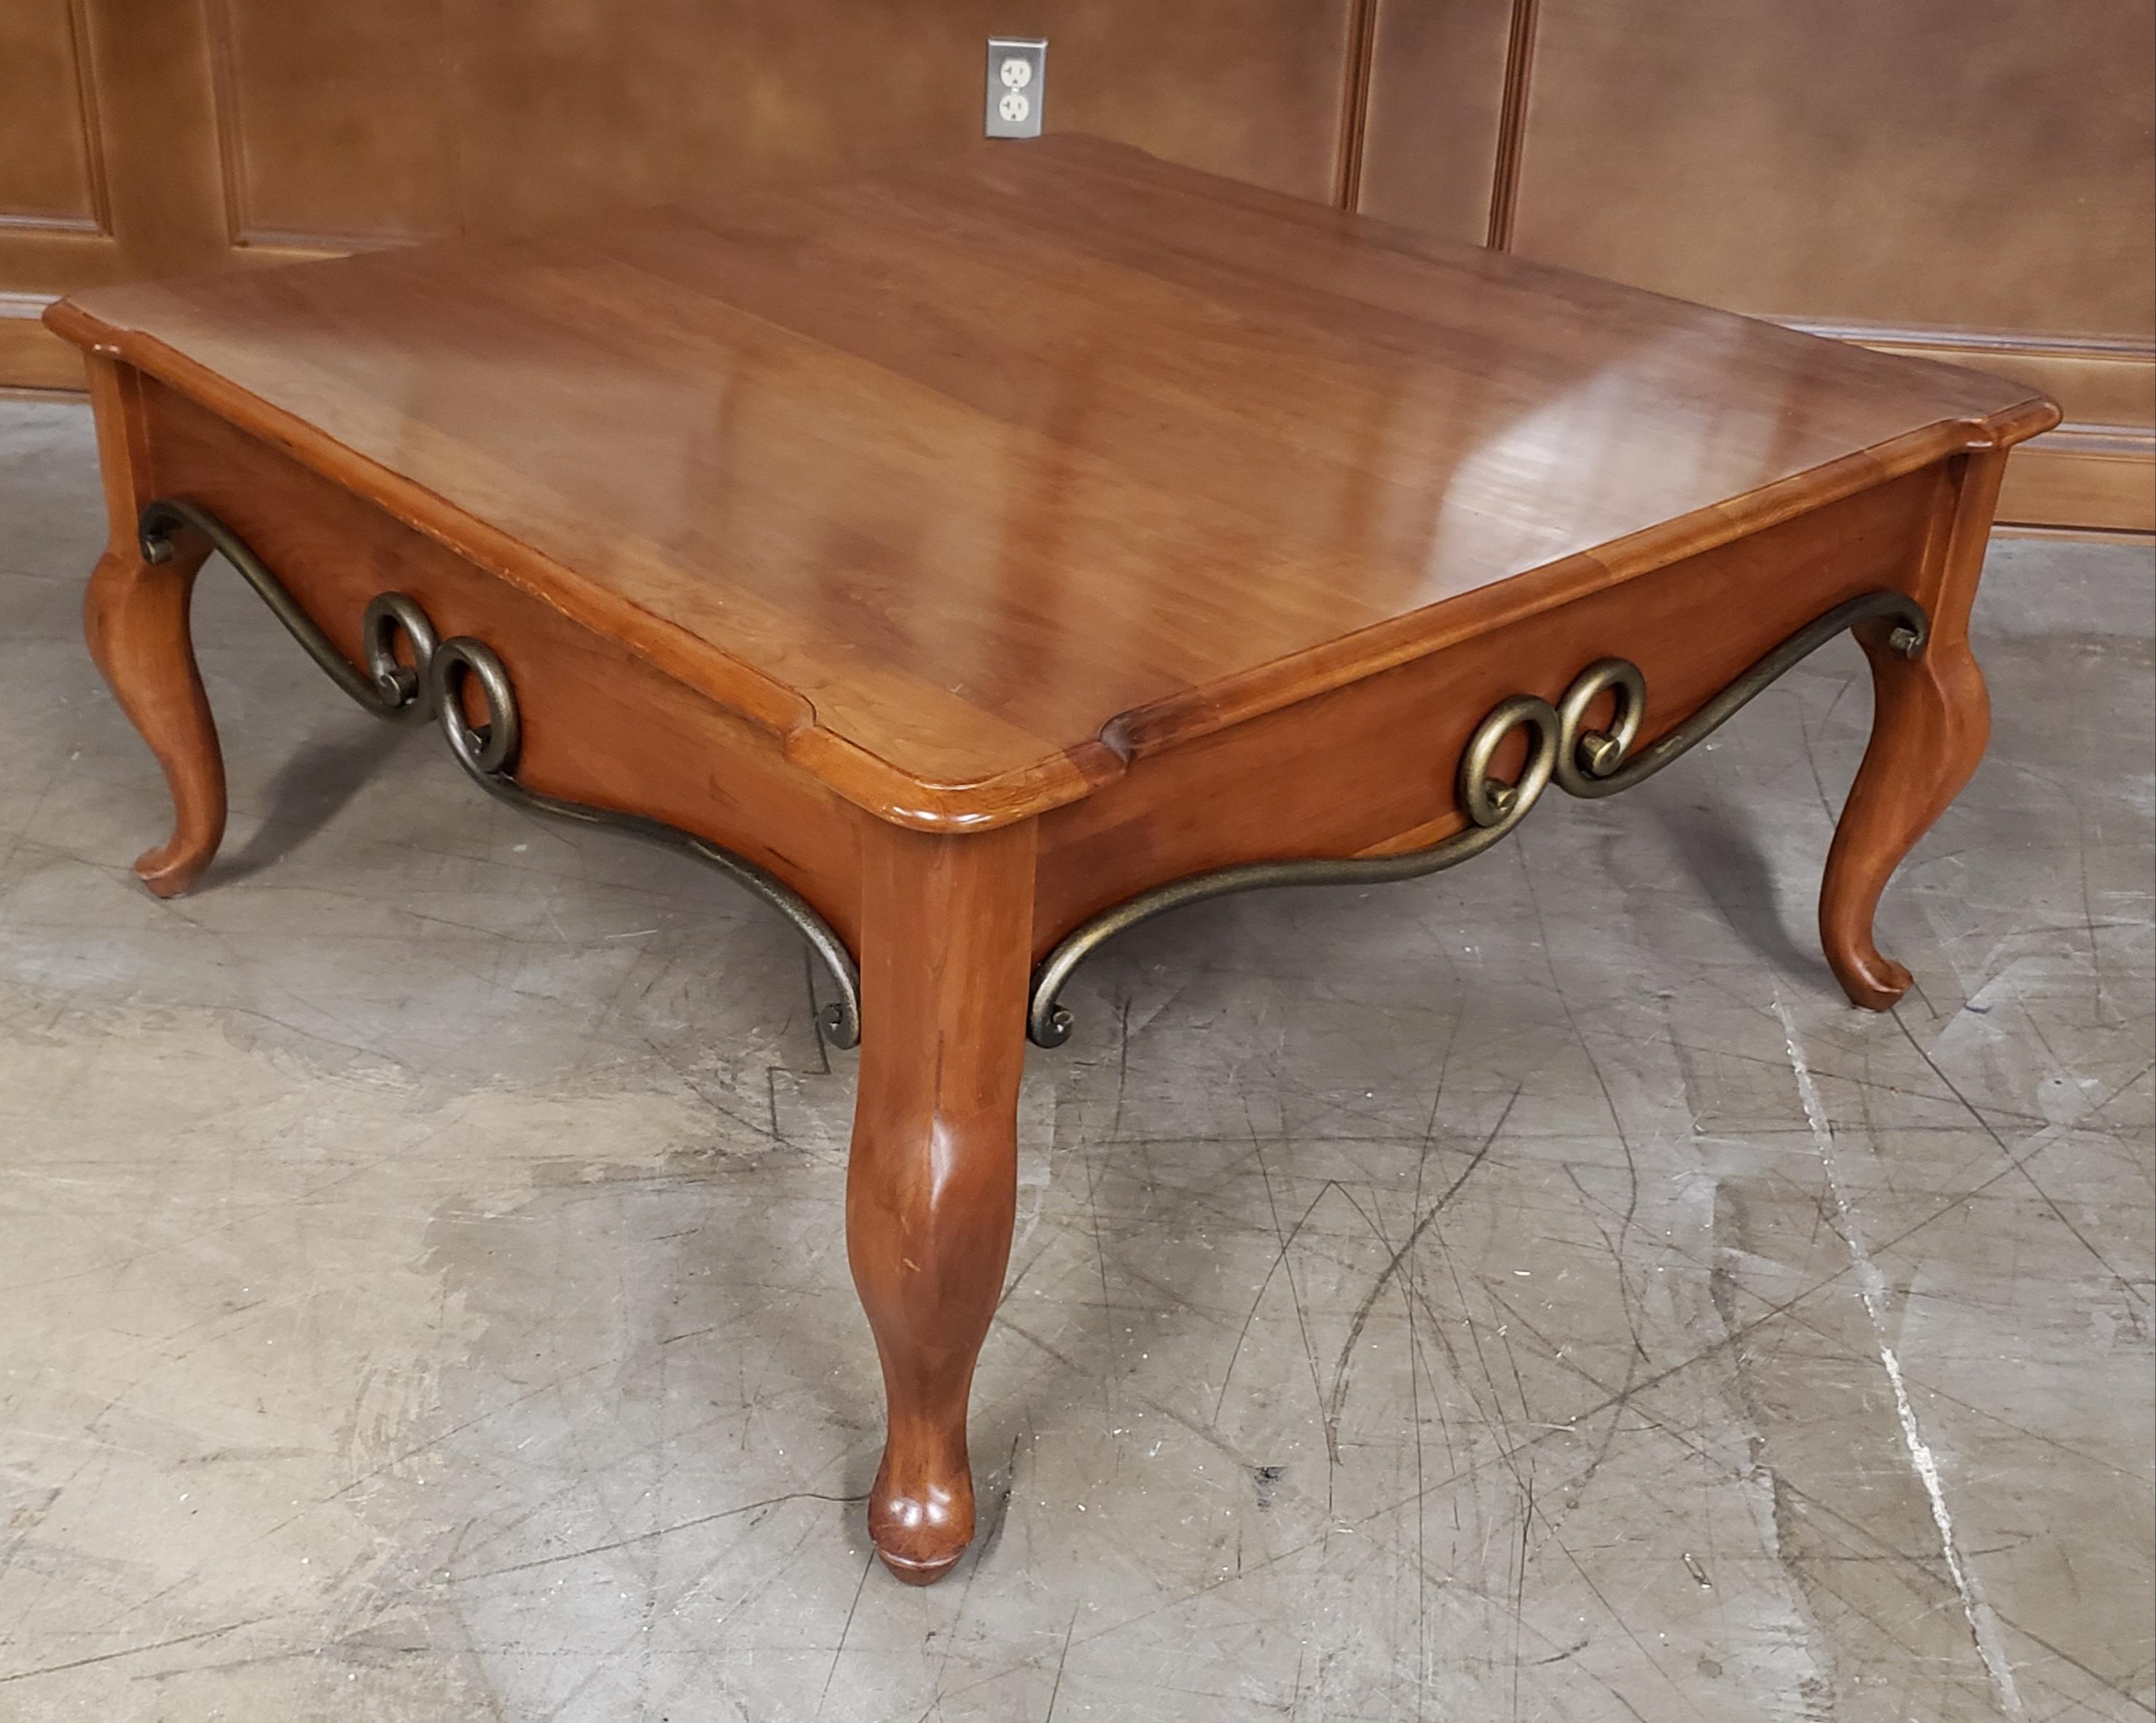 A Pennsylvania House solid cherry and patinated metal coffee table with Queen Anne feet.
Measures 42